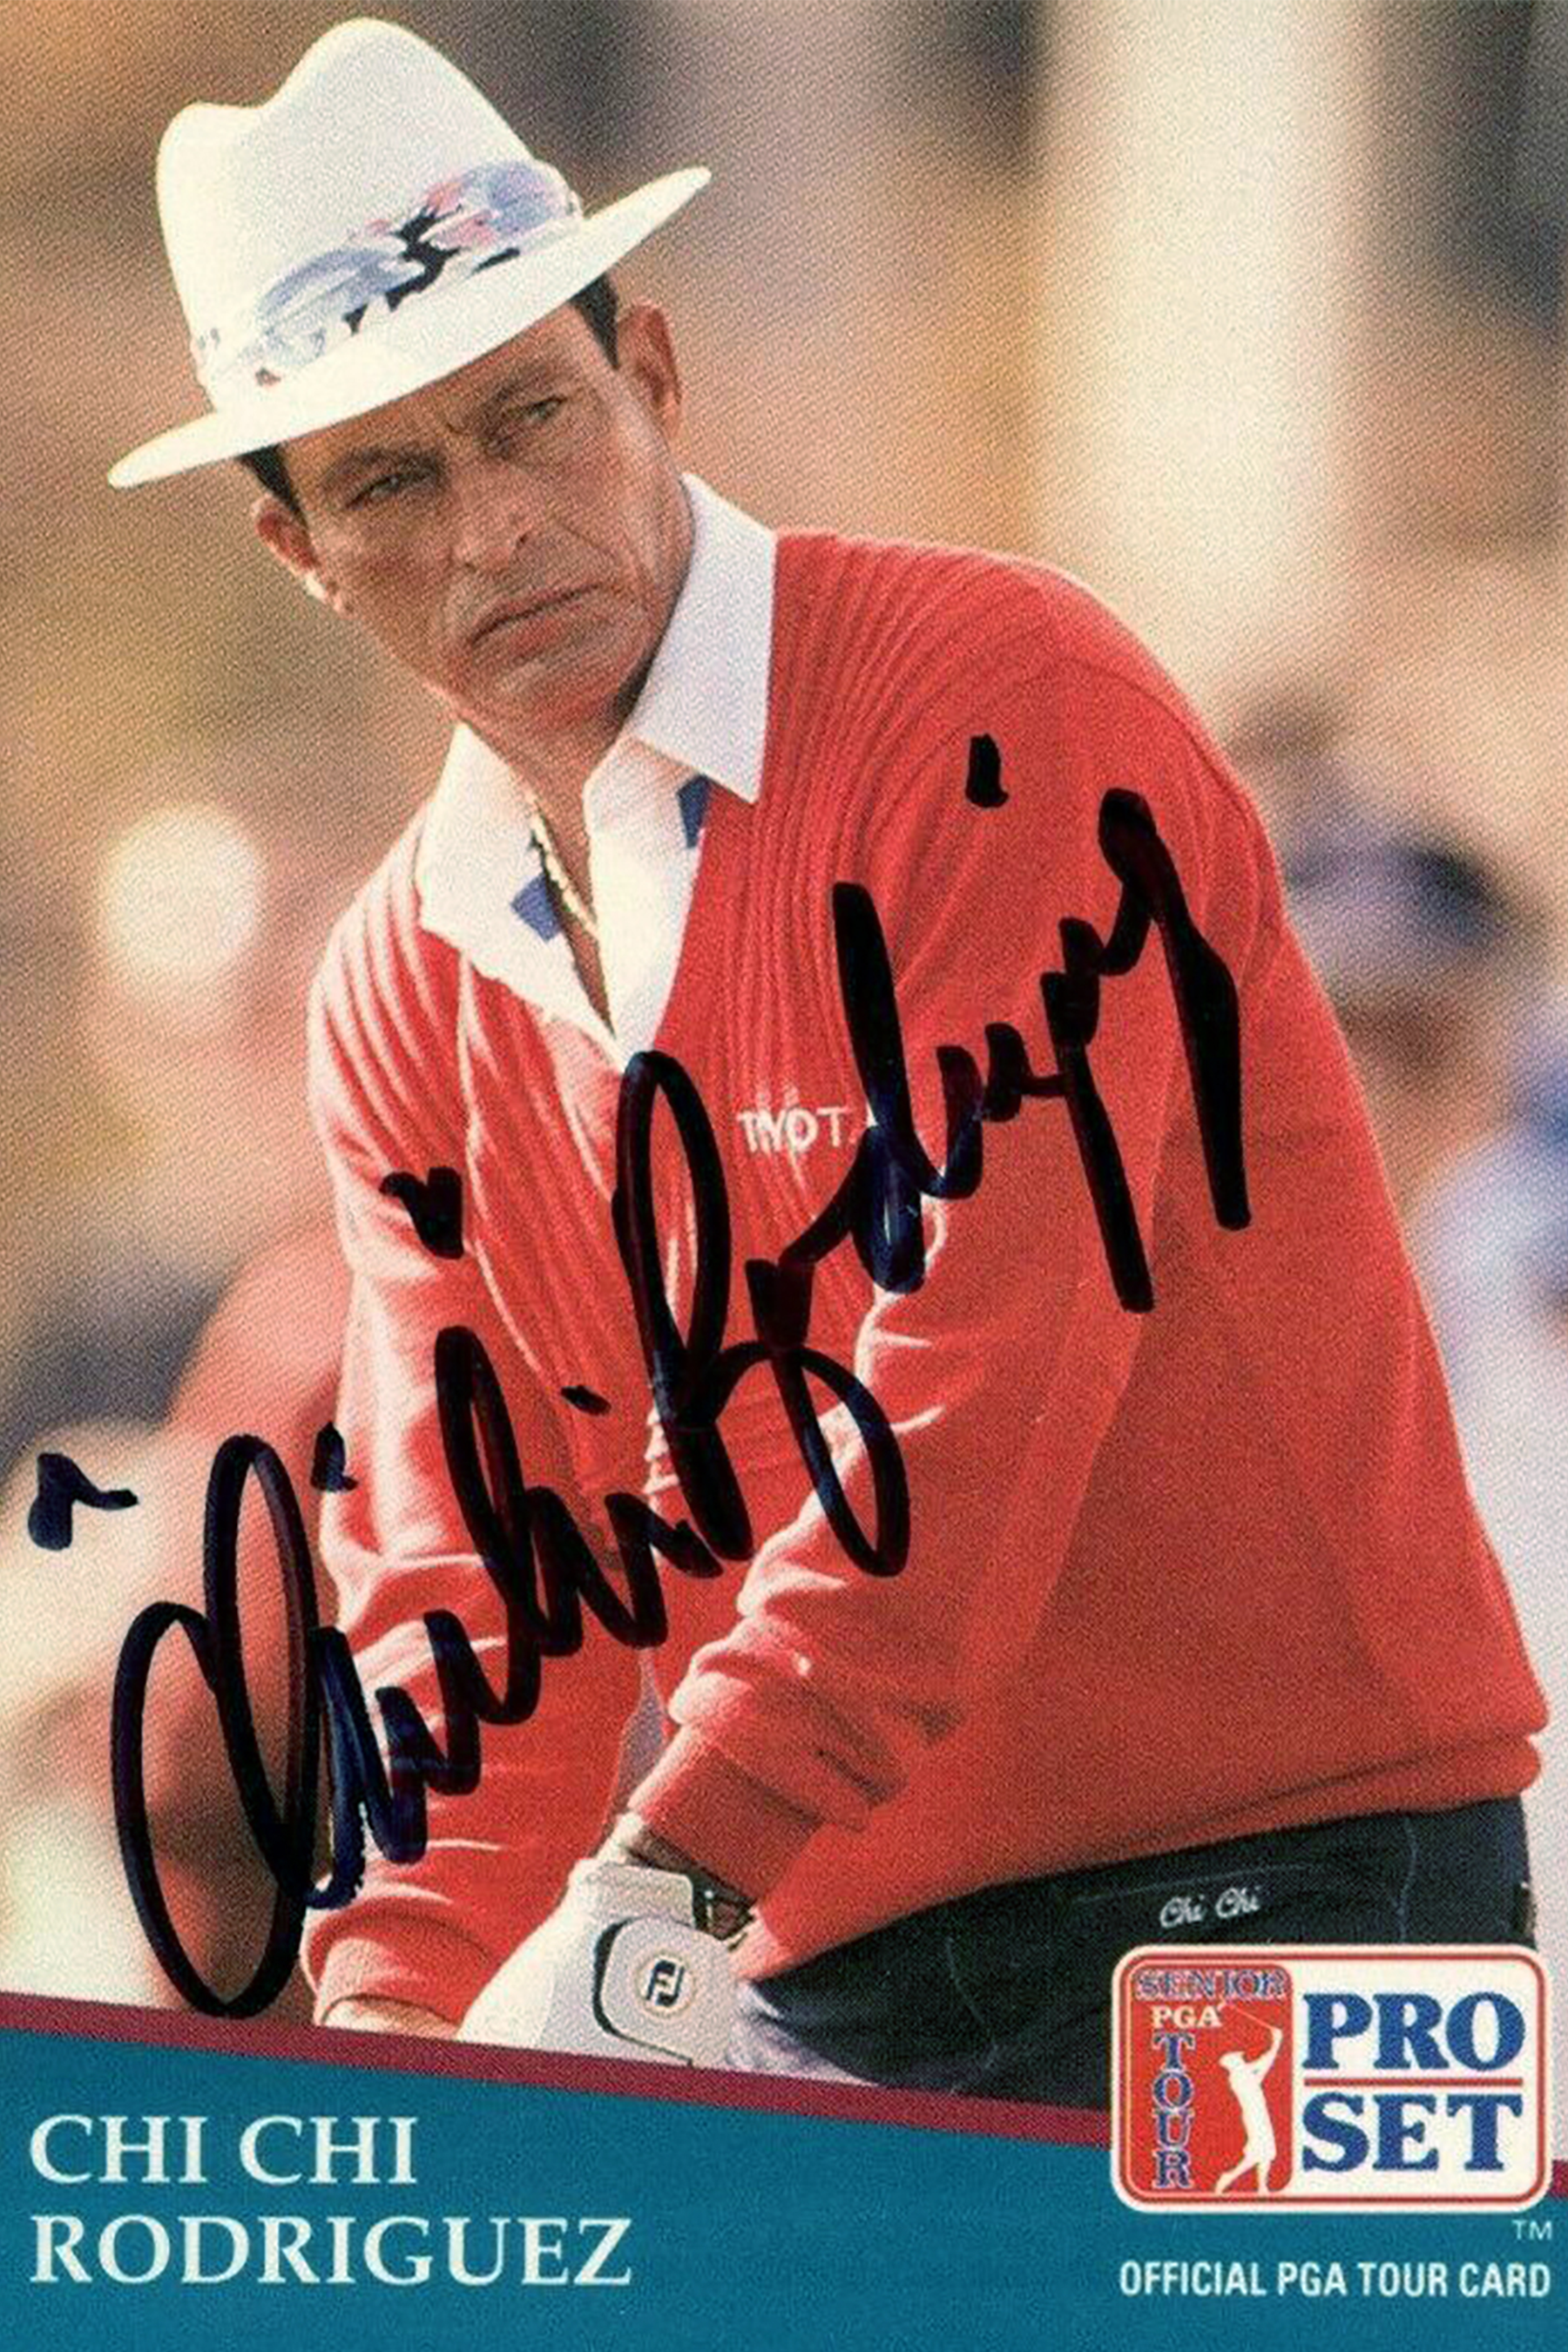 Chi Chi Rodriguez autograph on an offical PGC Tour card